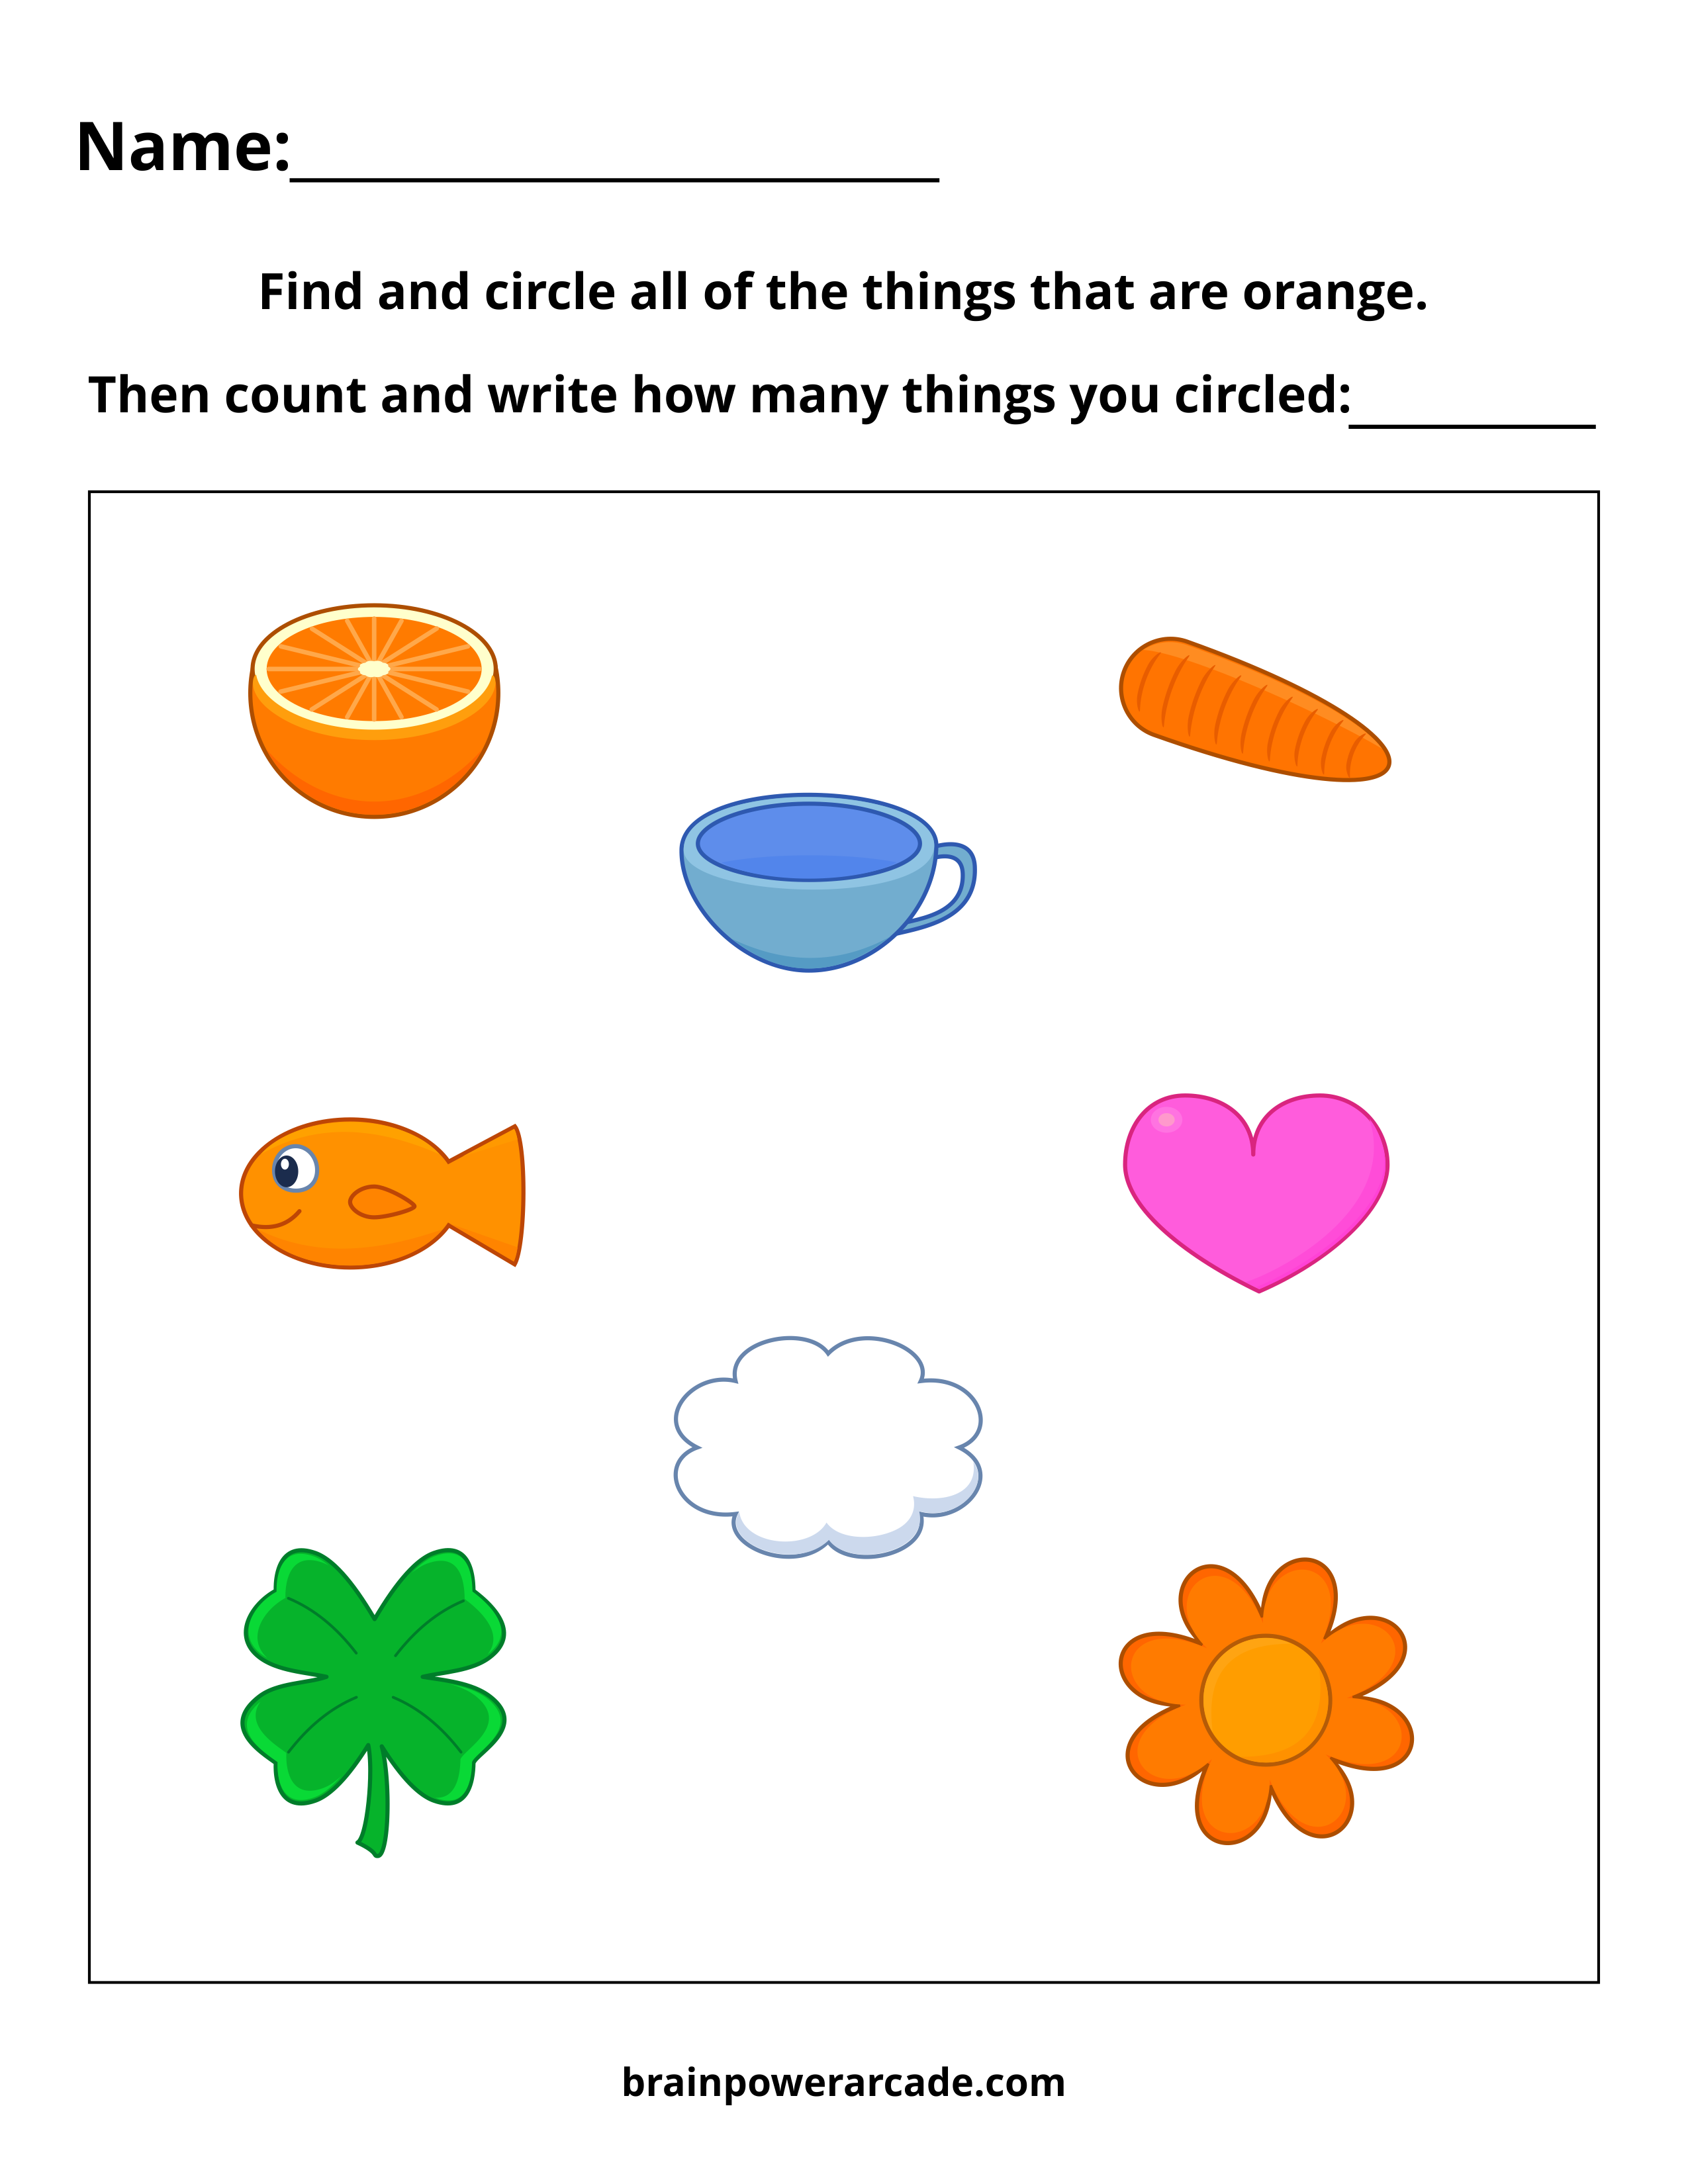 Find and Circle Things That are Orange